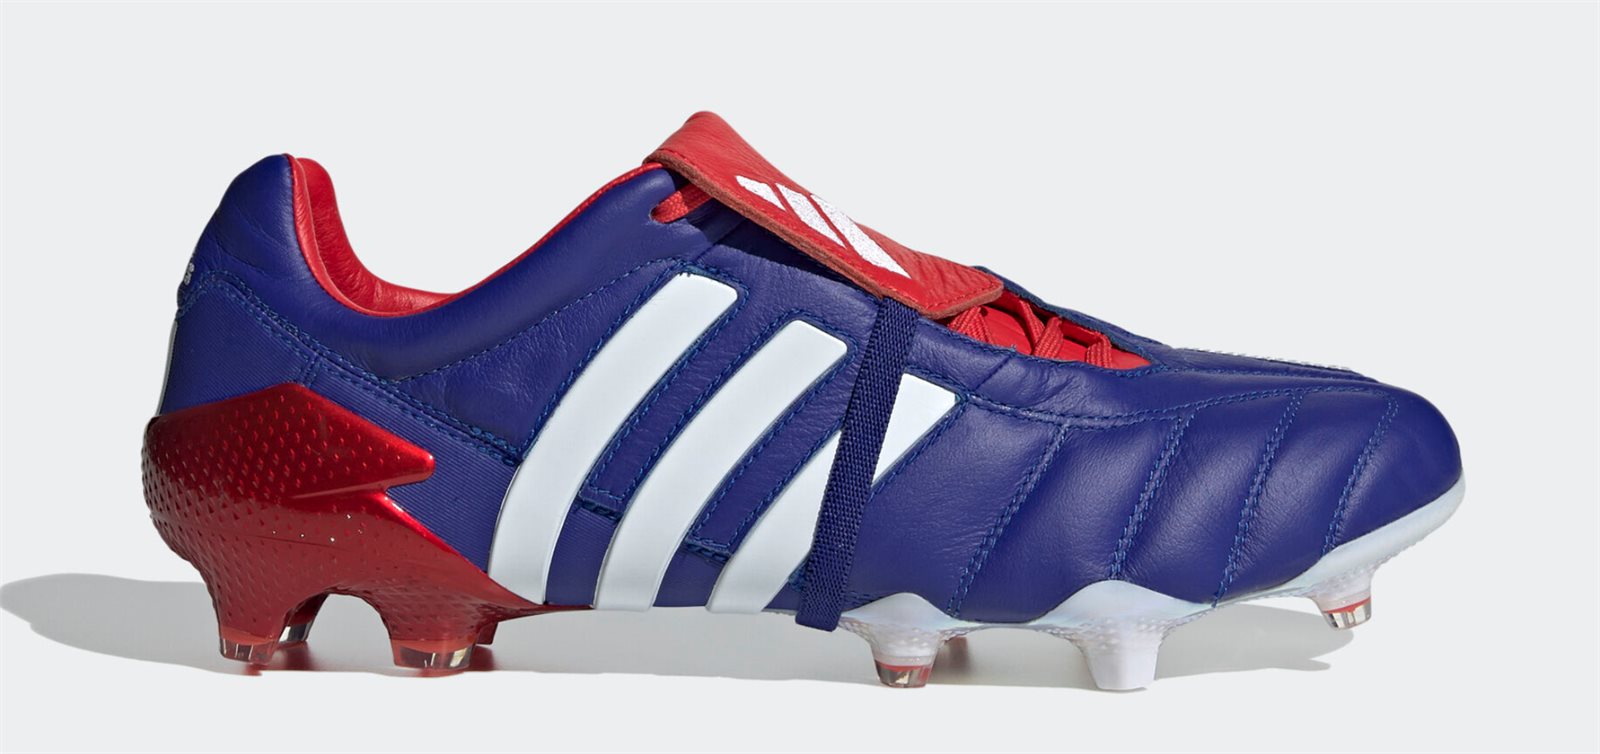 2019 adidas soccer cleats